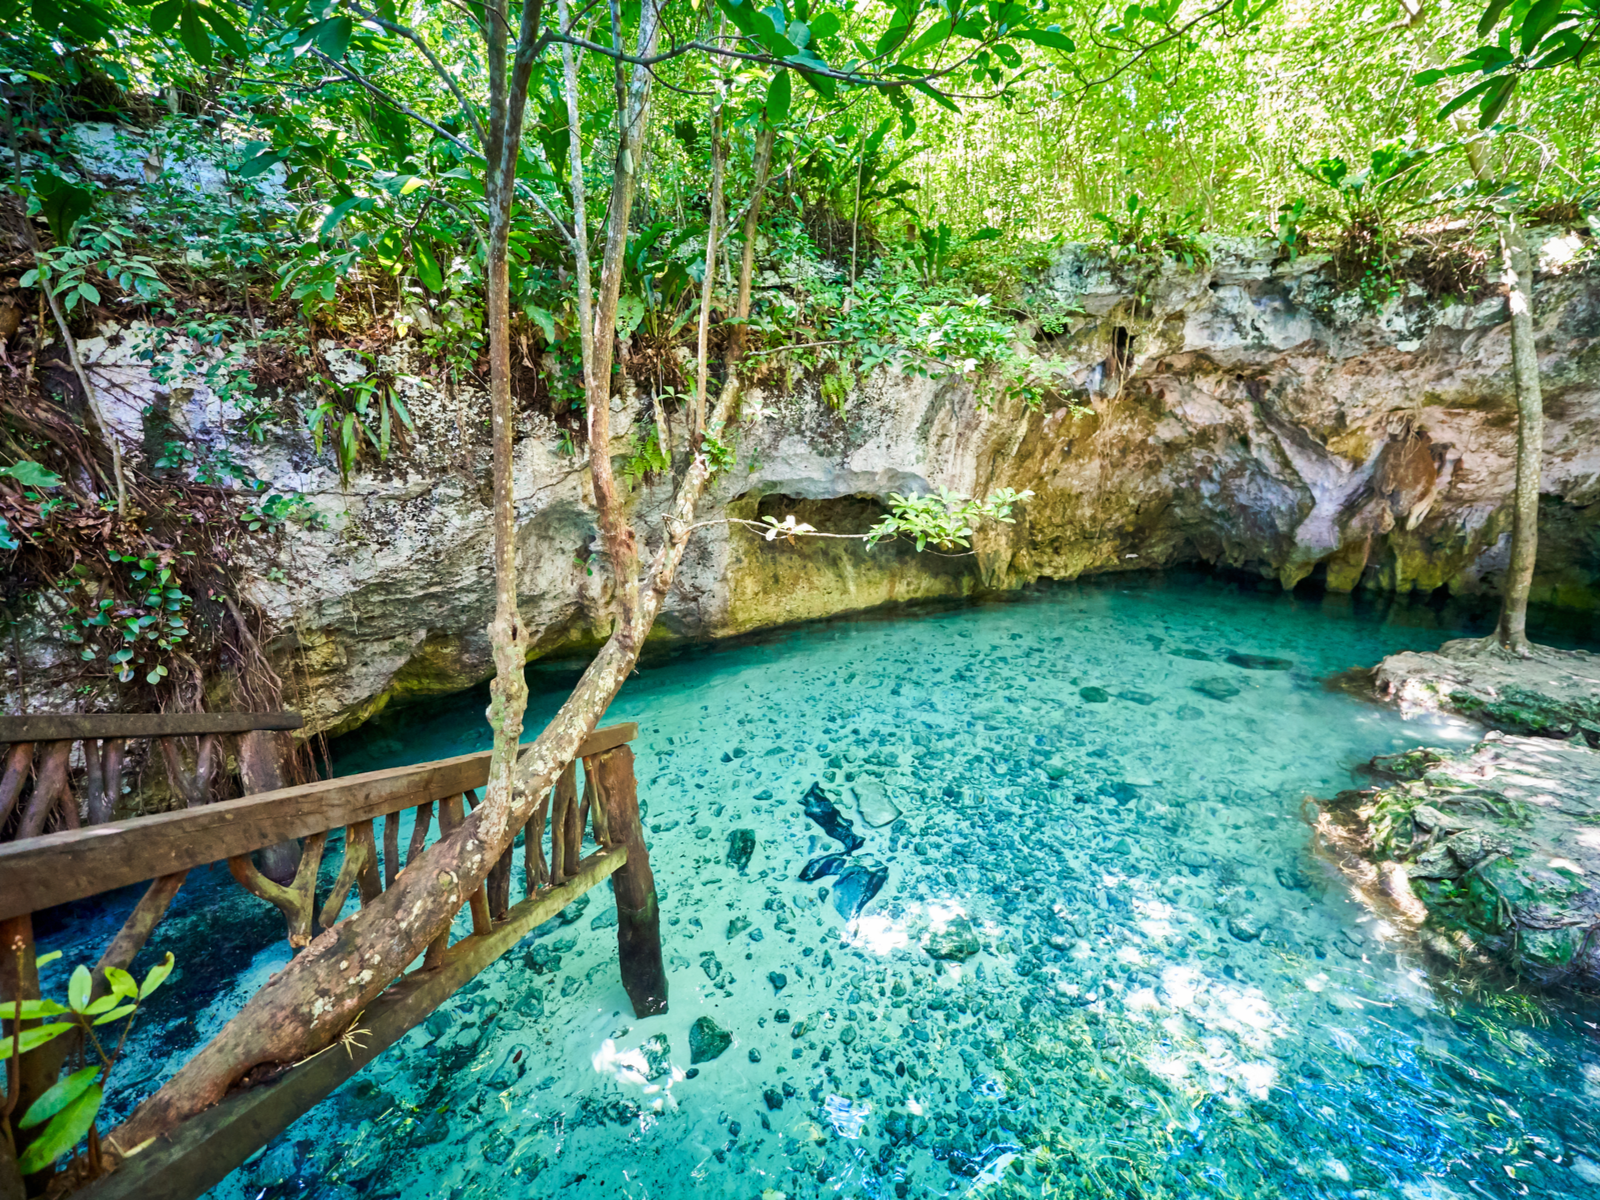 Gran Cenote, one of the best in Mexico, as pictured from the entrance at the bottom of the stairs